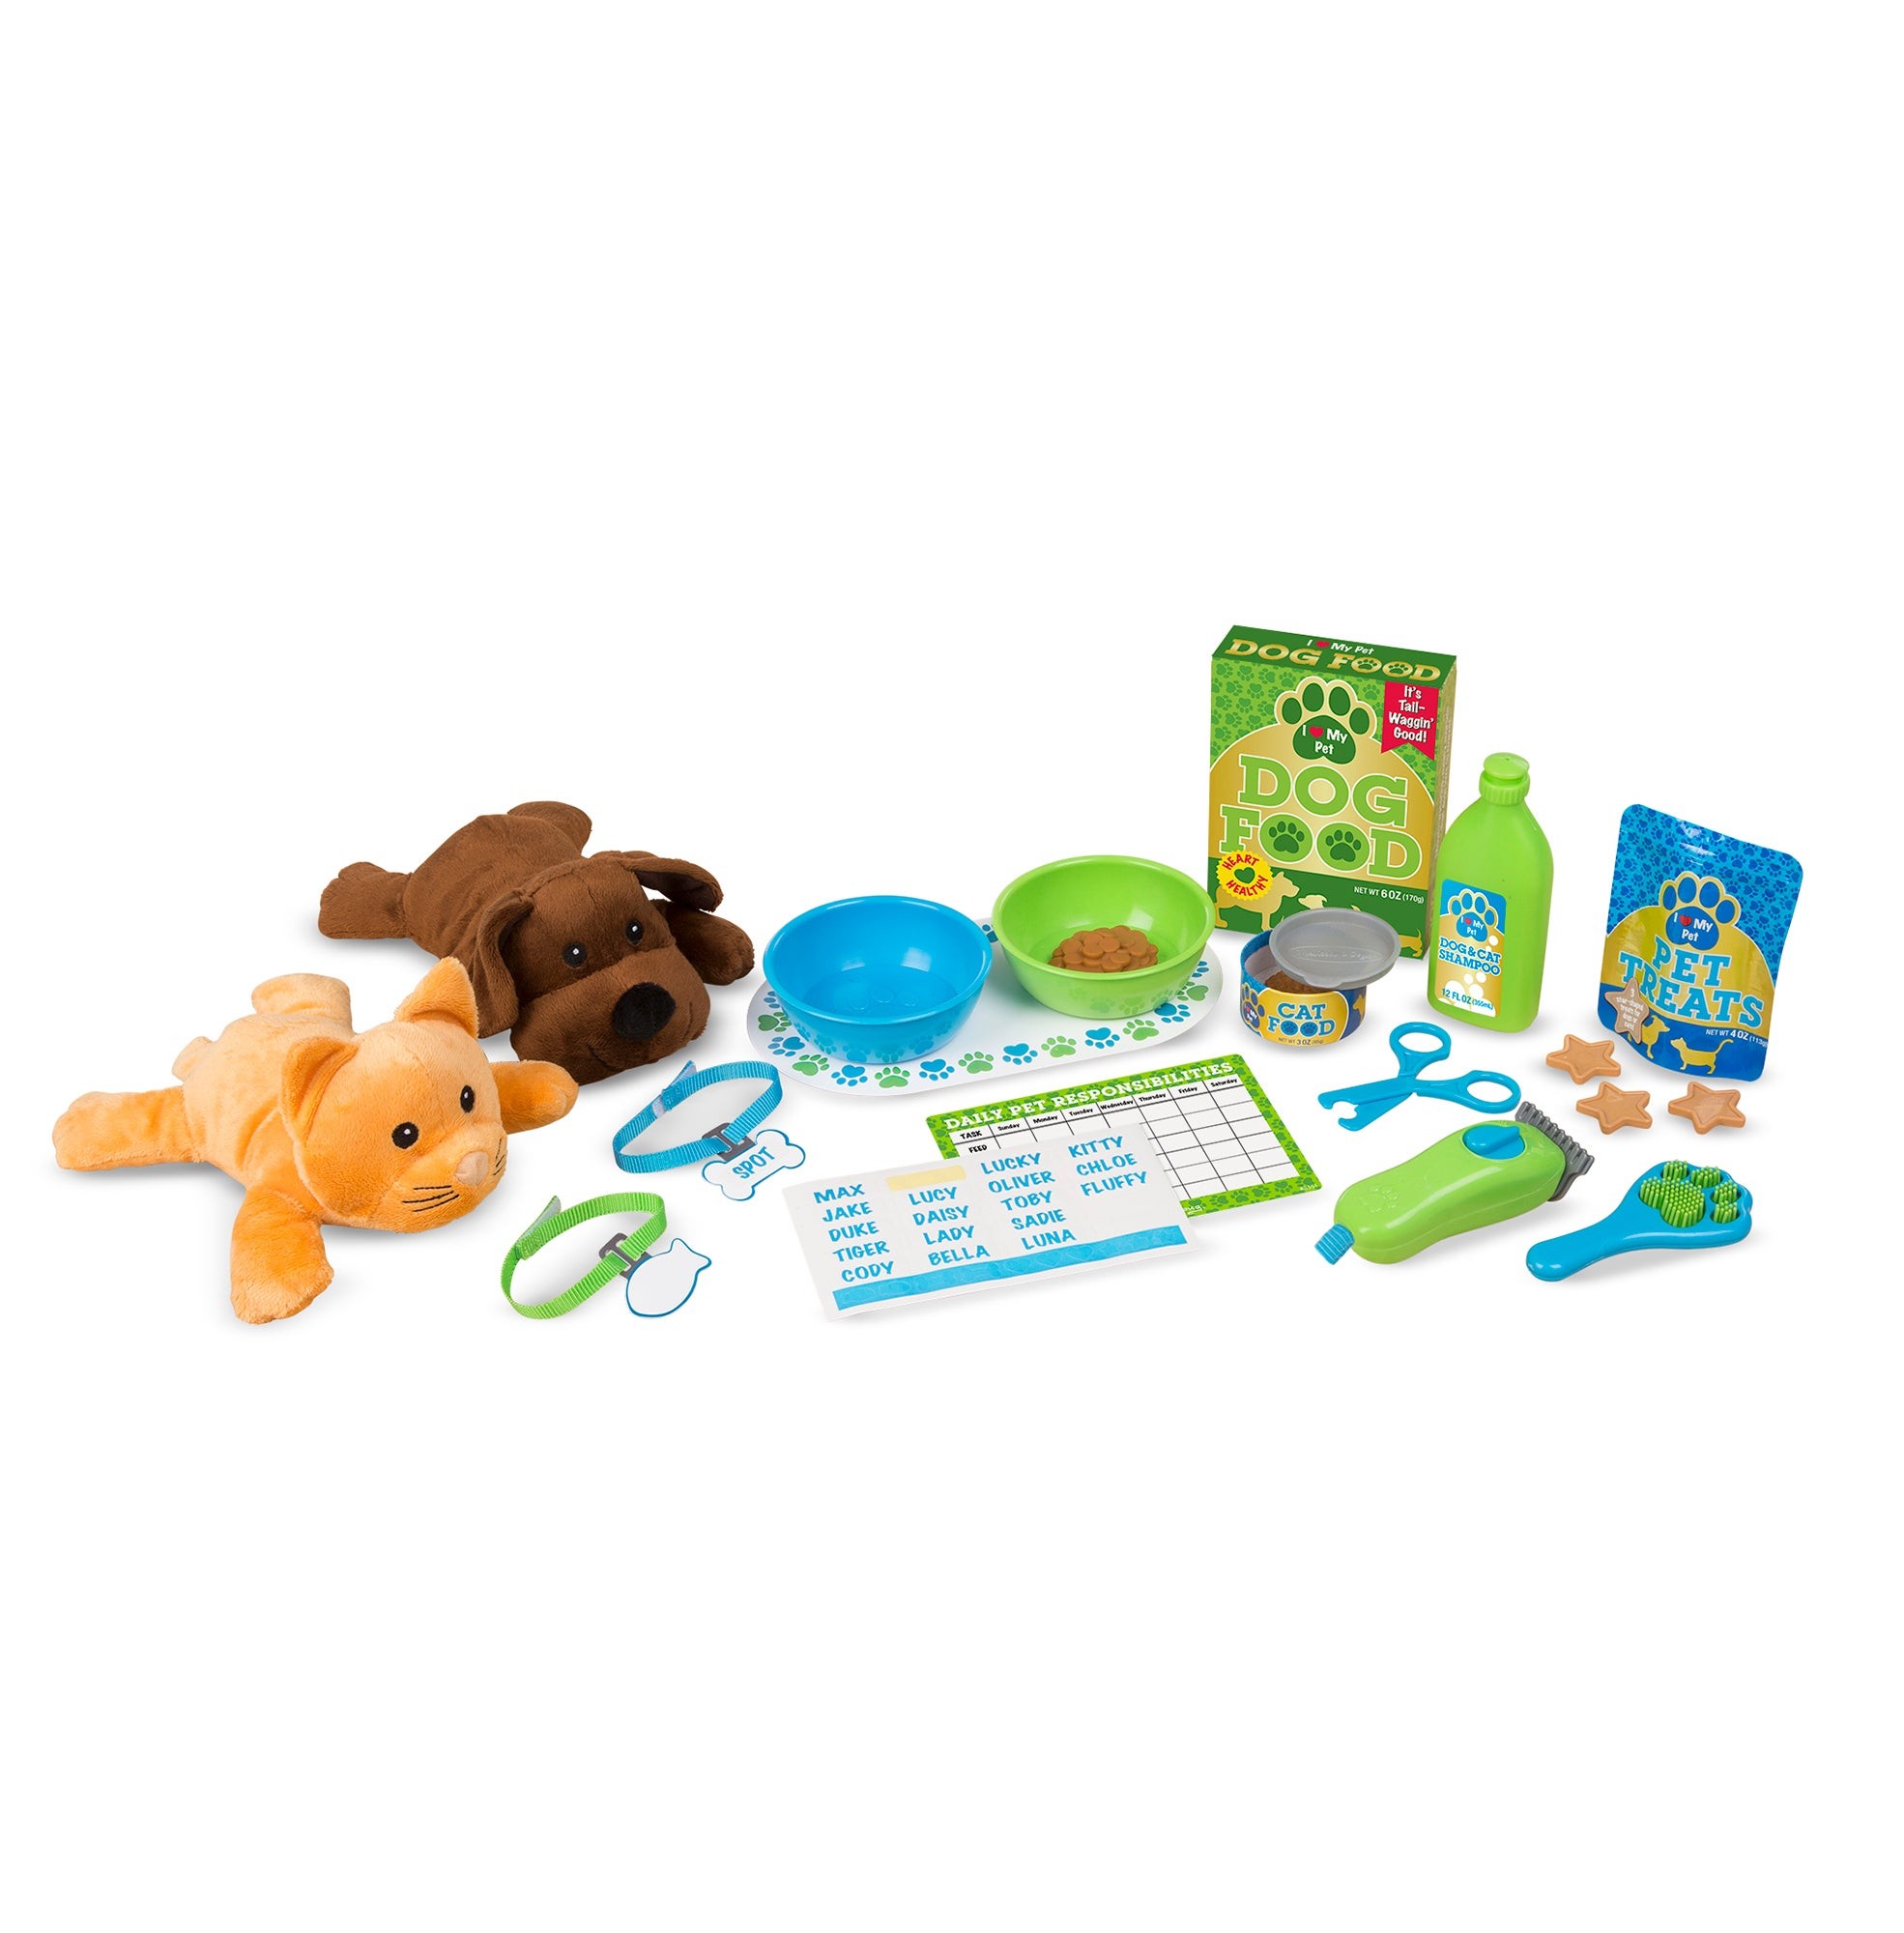 Feeding & Grooming Pet Care Play Set Ages 3+ Years